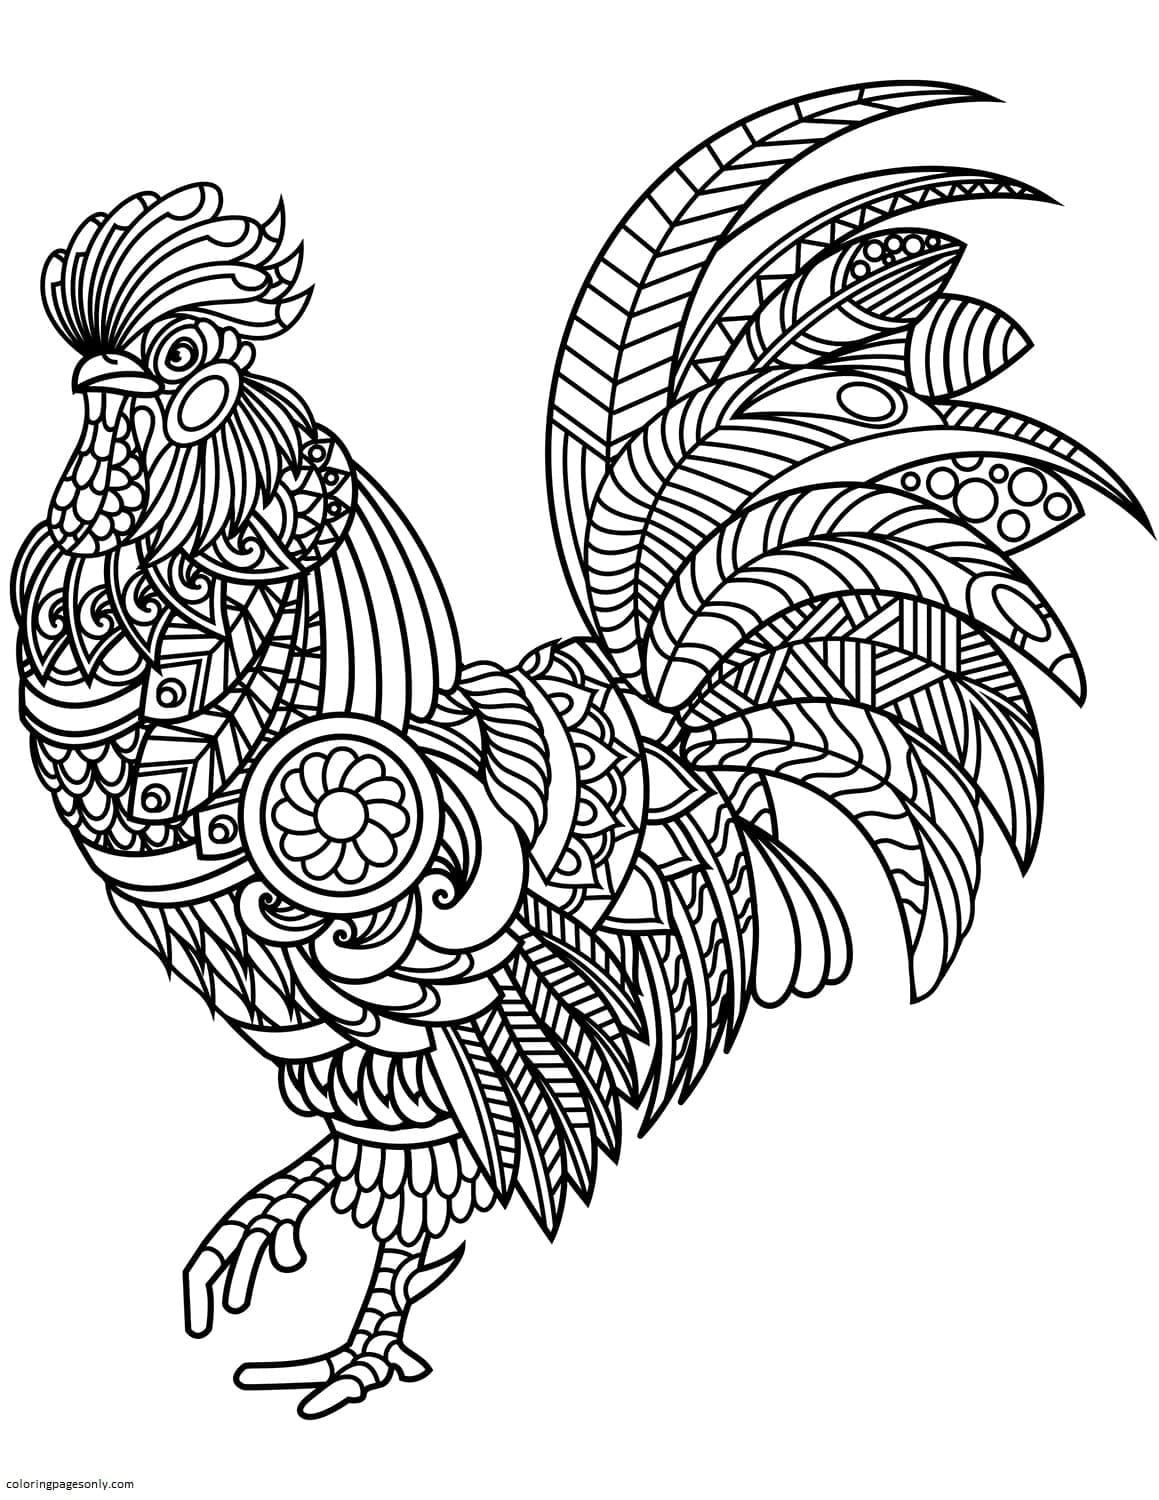 Rooster Zentangle Coloring Page